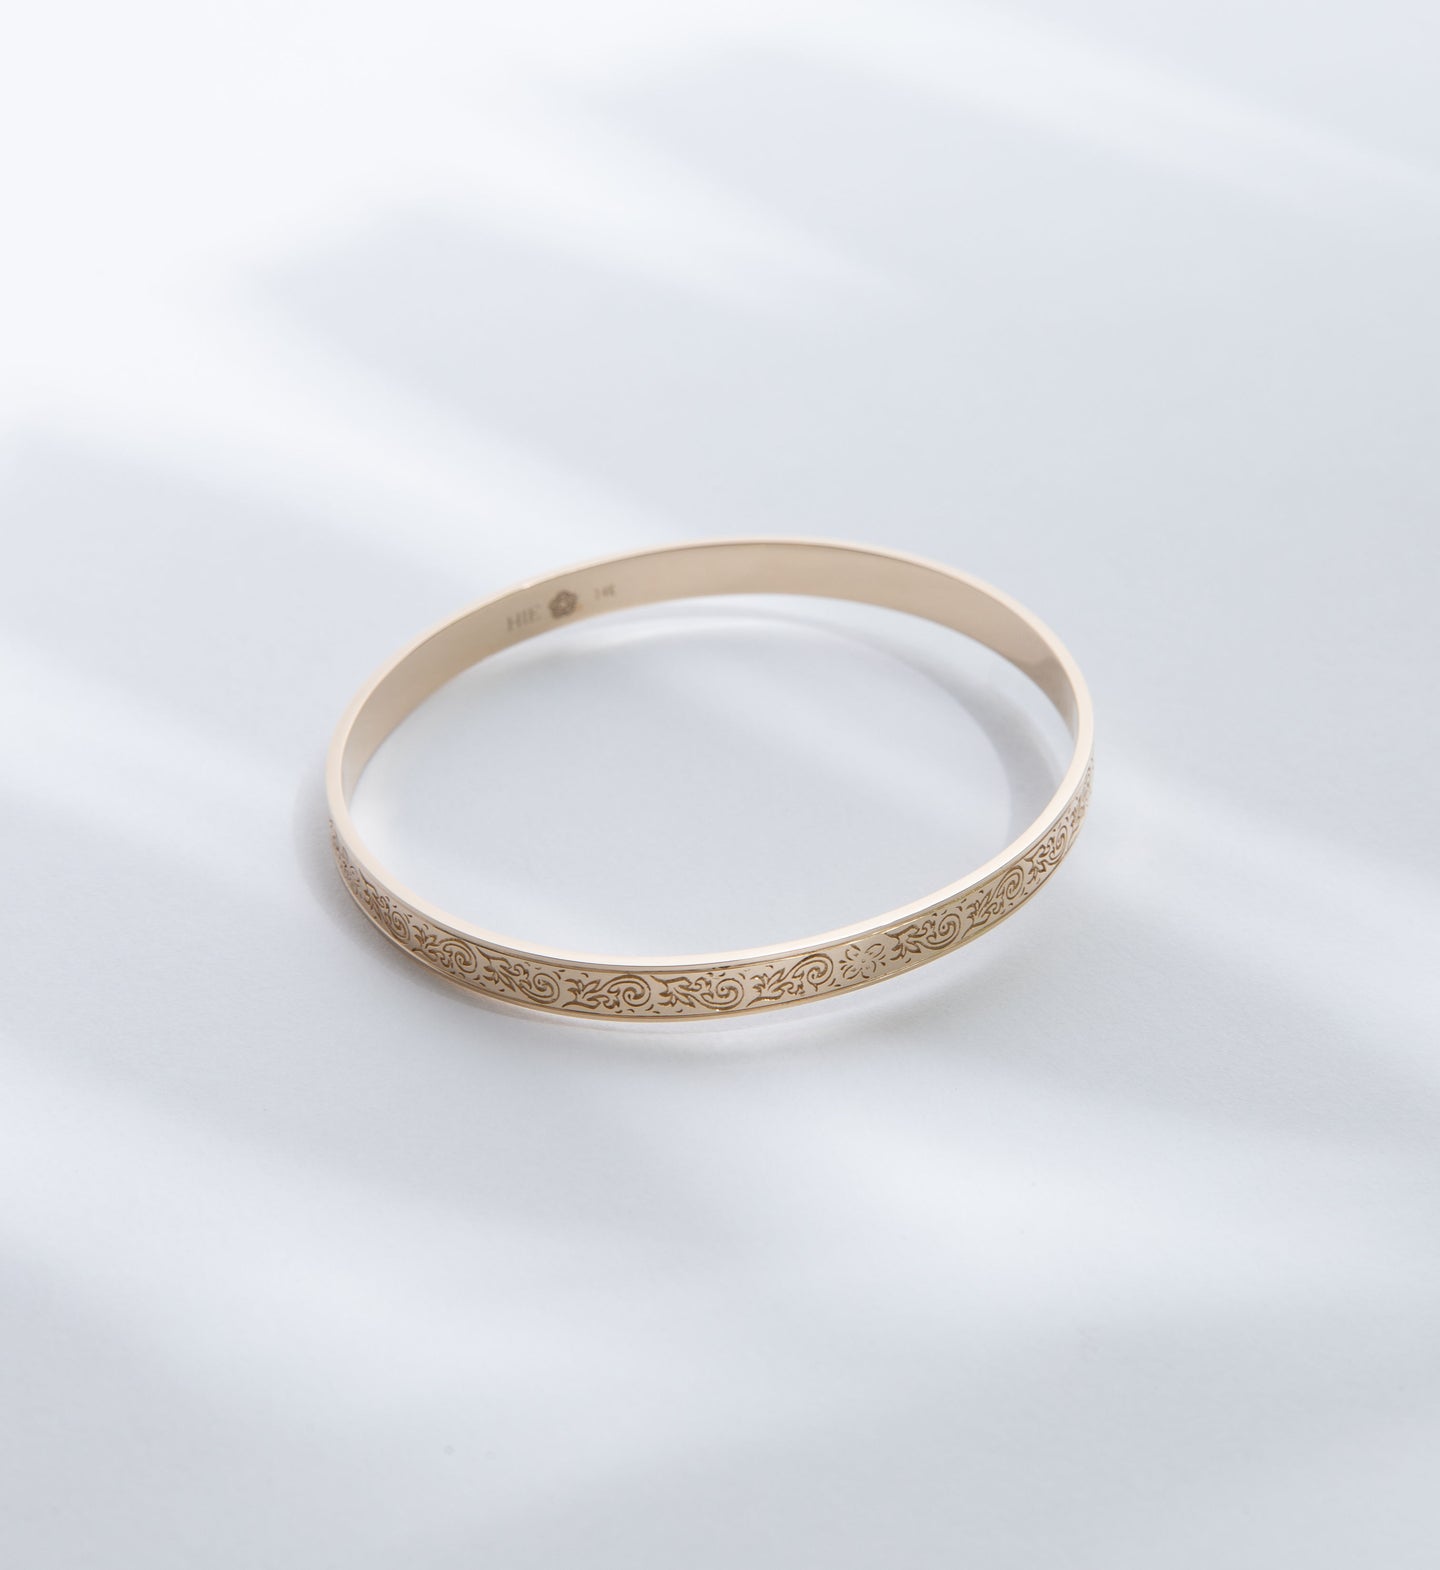 Hie Uluhe gold bangle bracelet with detailed engraving